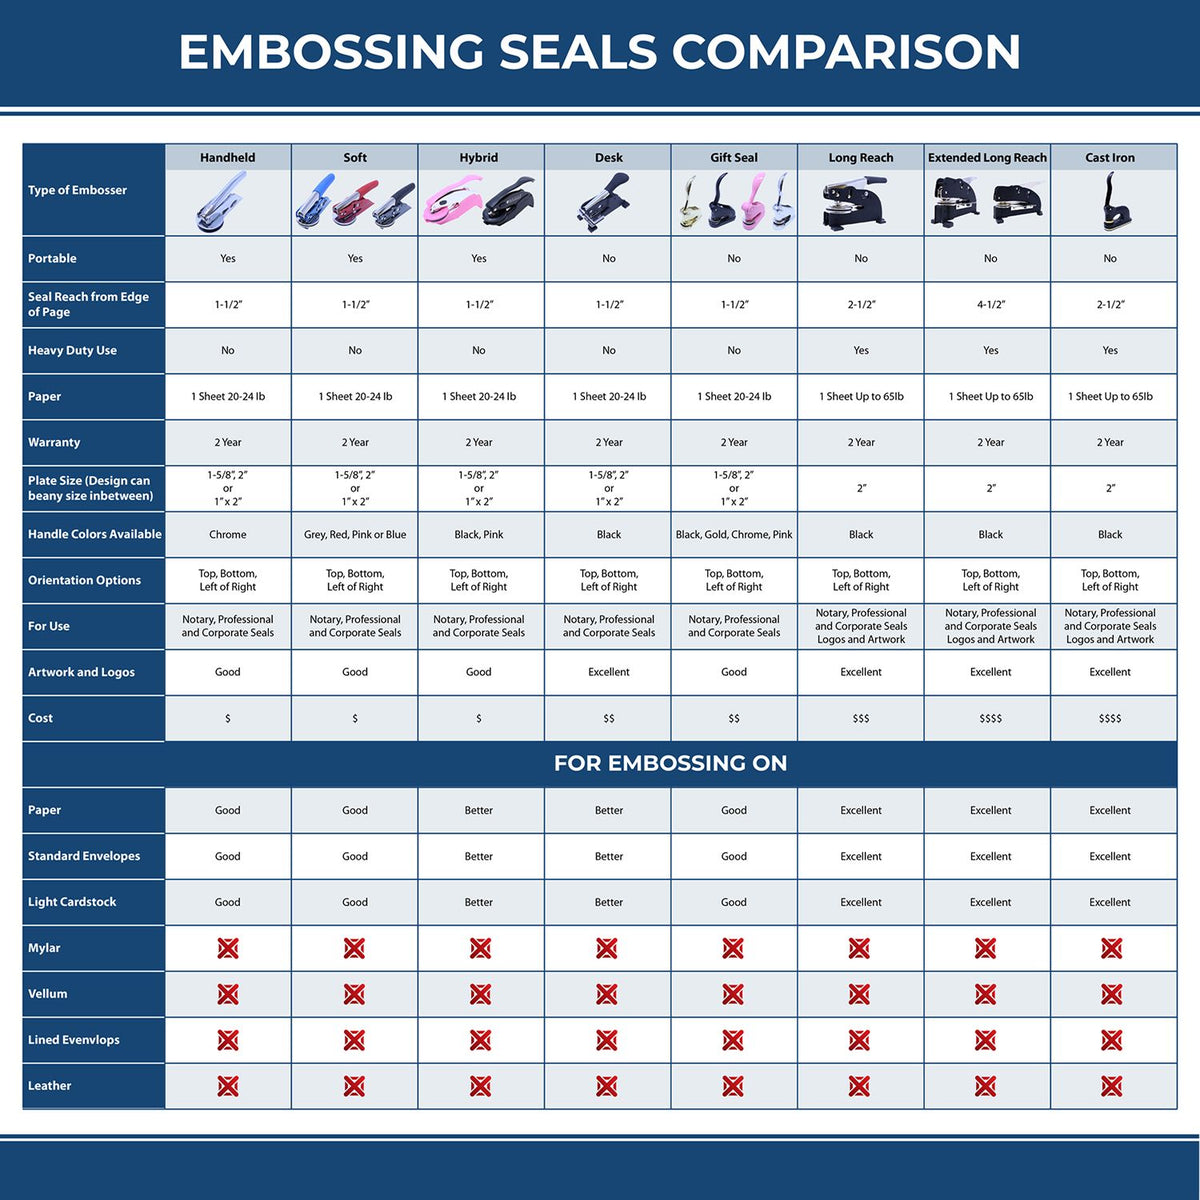 A comparison chart for the different types of mount models available for the Heavy Duty Cast Iron South Carolina Engineer Seal Embosser.